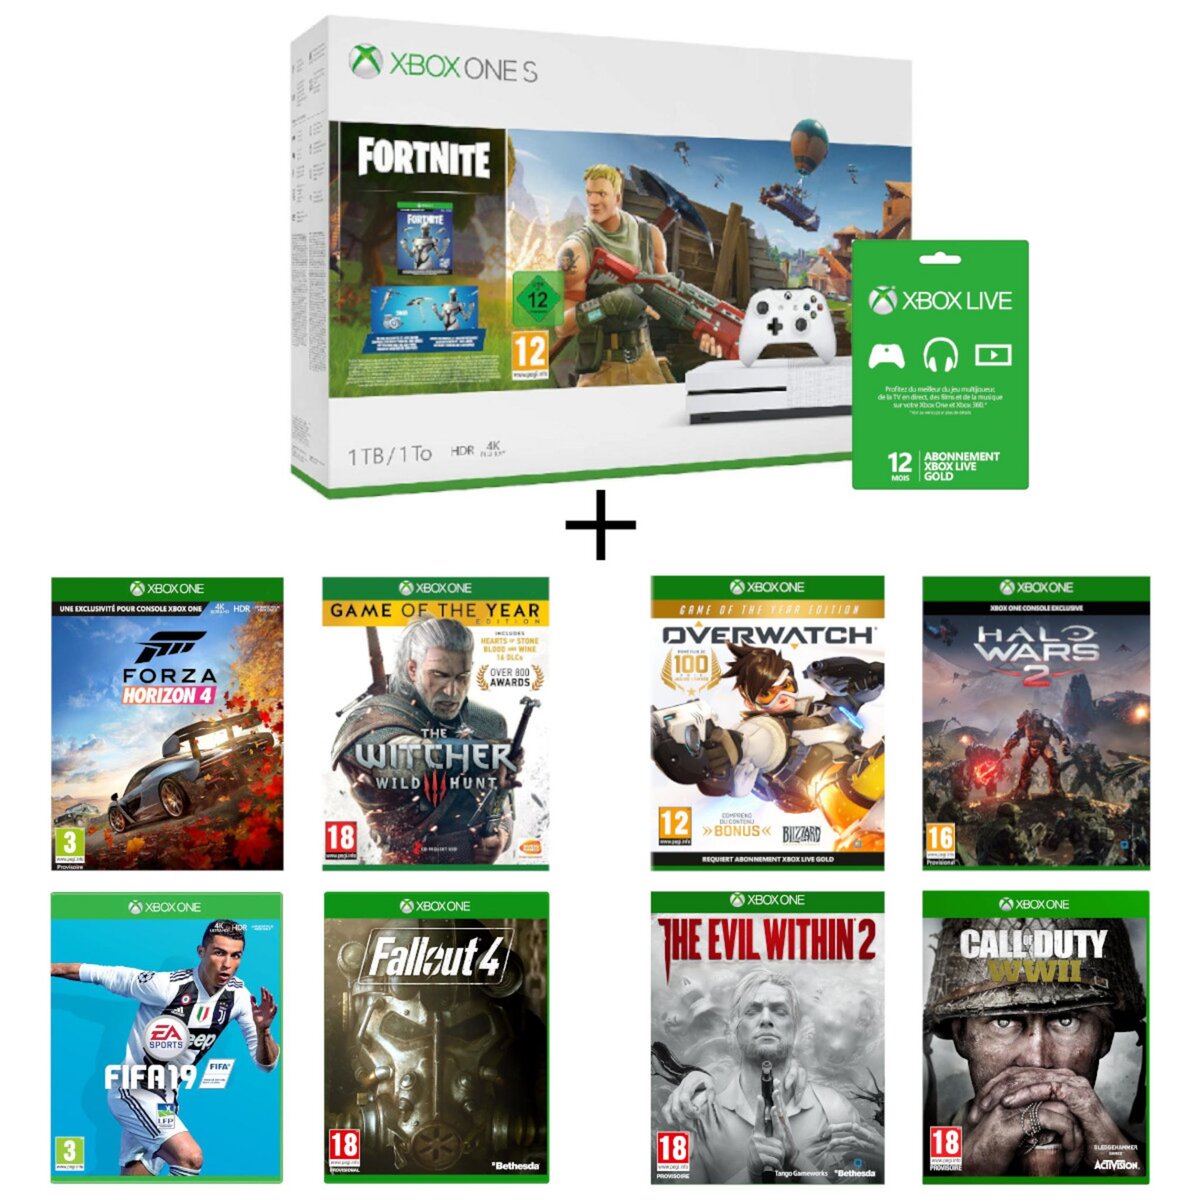 Console Xbox One S Fortnite + FIFA 19 + Forza Horizon 4 + Fallout 4 + The Witcher 3 + The Evil Within 2 + Call Of Duty WWII + Halo Wars 2 + Overwatch GOTY + Abonnement Live 1 an